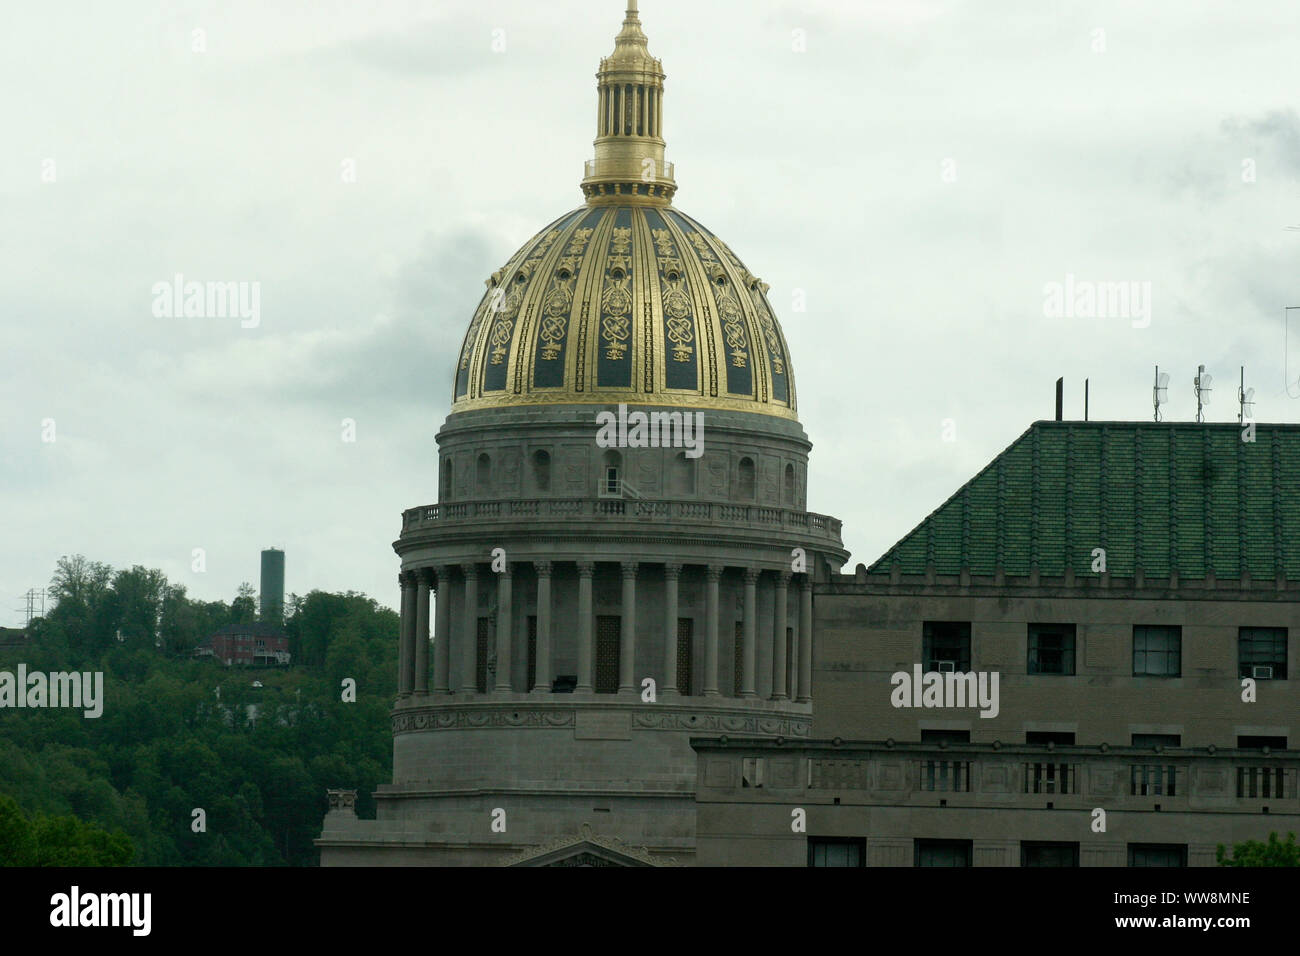 The golden dome of the West Virginia State Capitol in Charleston, WV, USA Stock Photo